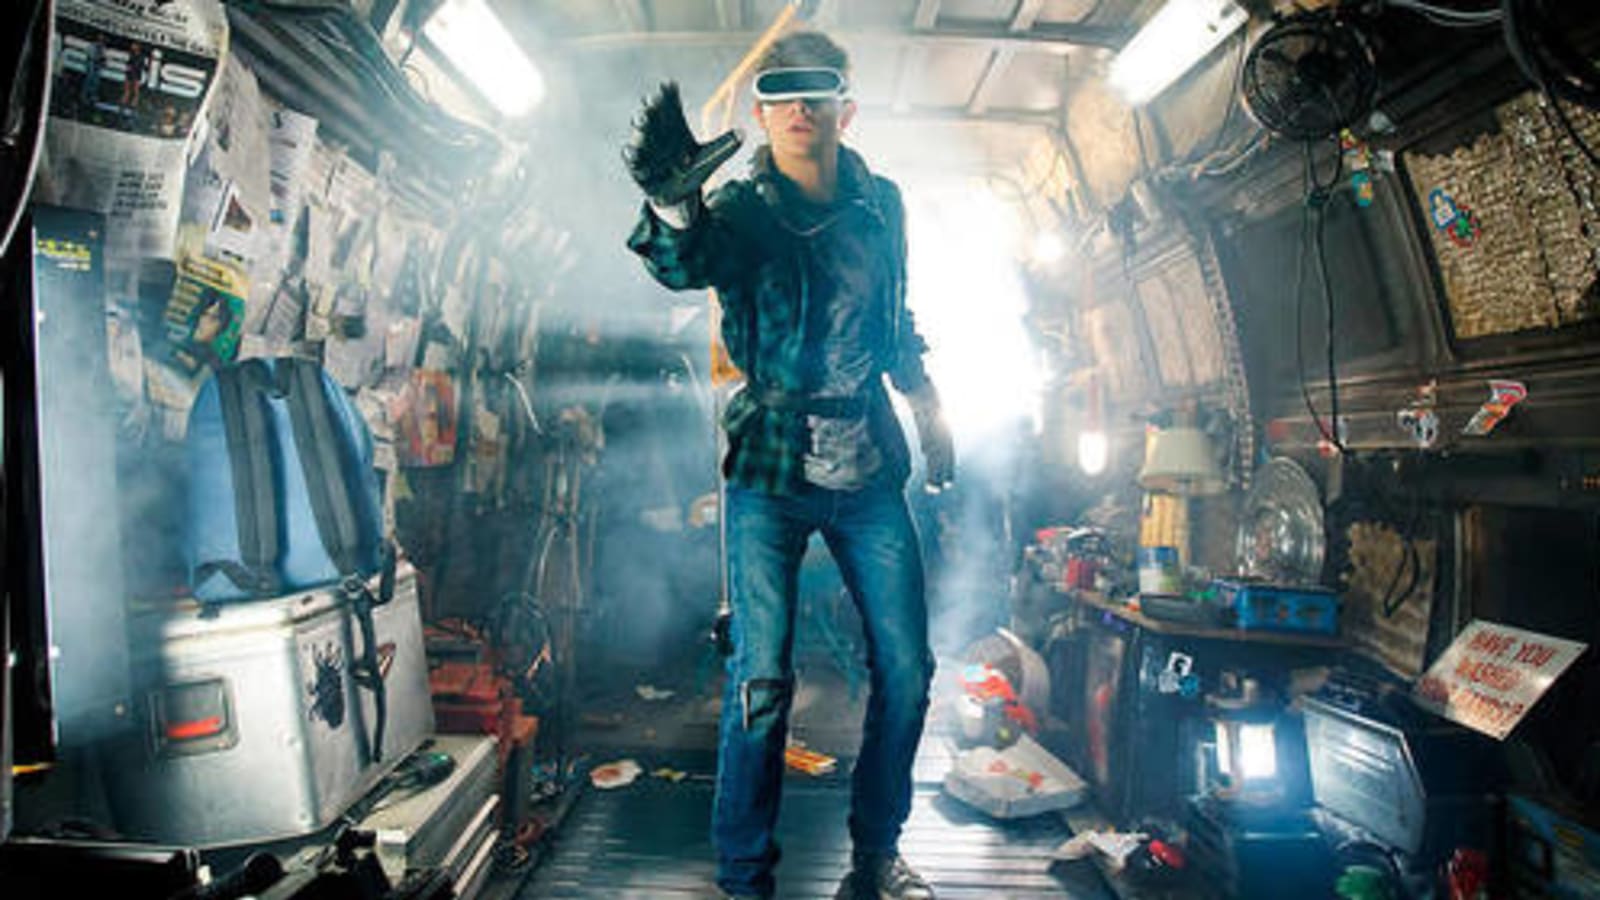 Retro references only true ‘80s kids will get in 'Ready Player One'